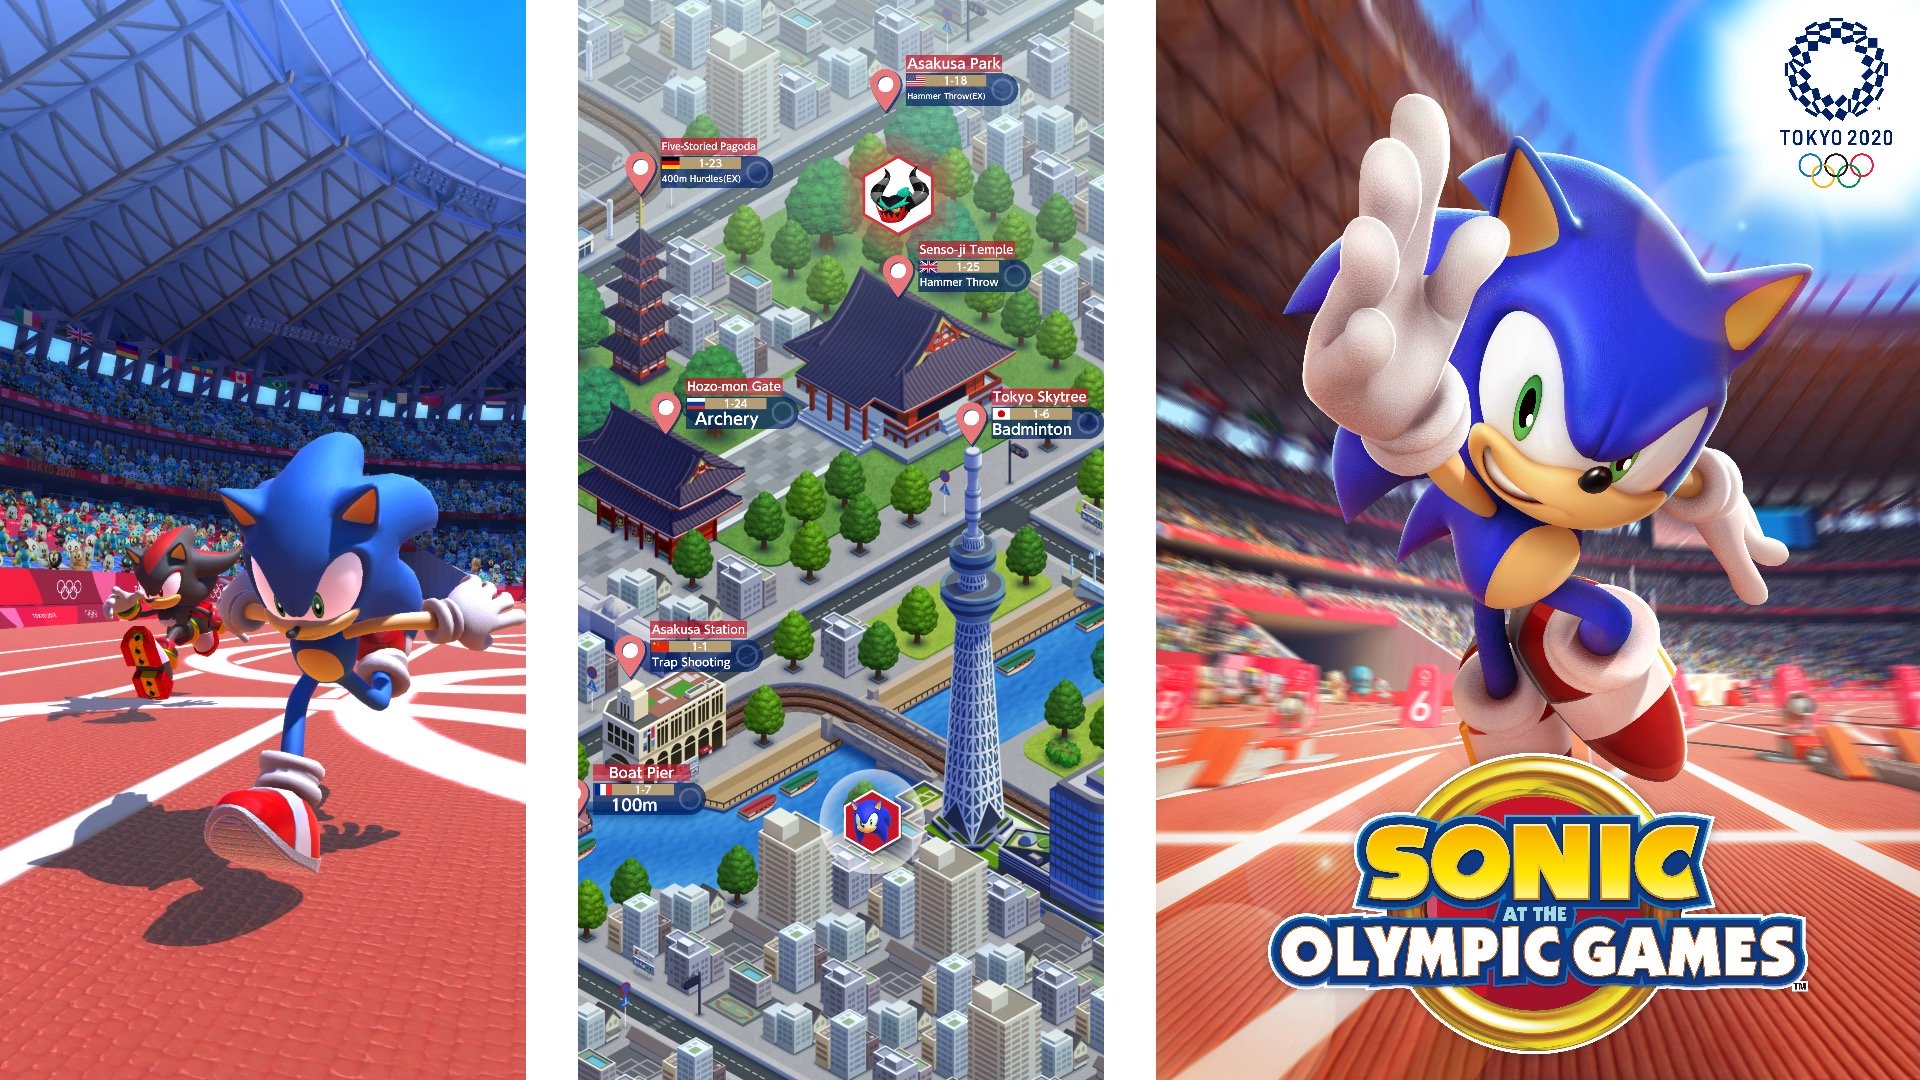 Mario And Sonic At The Olympic Games 2020 - HD Wallpaper 